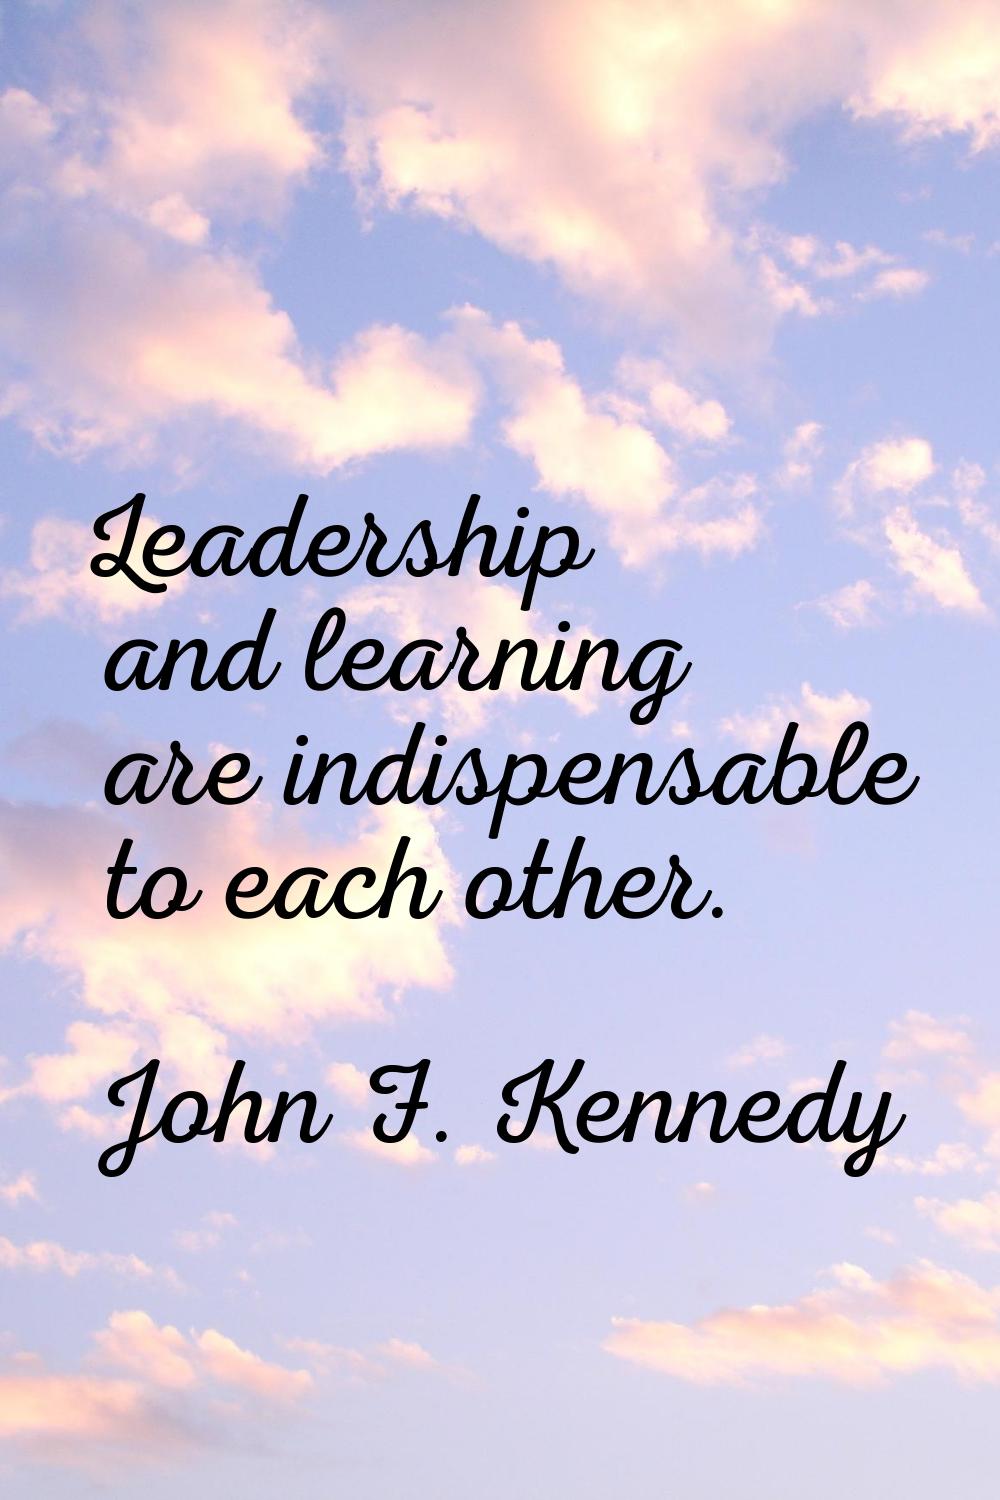 Leadership and learning are indispensable to each other.